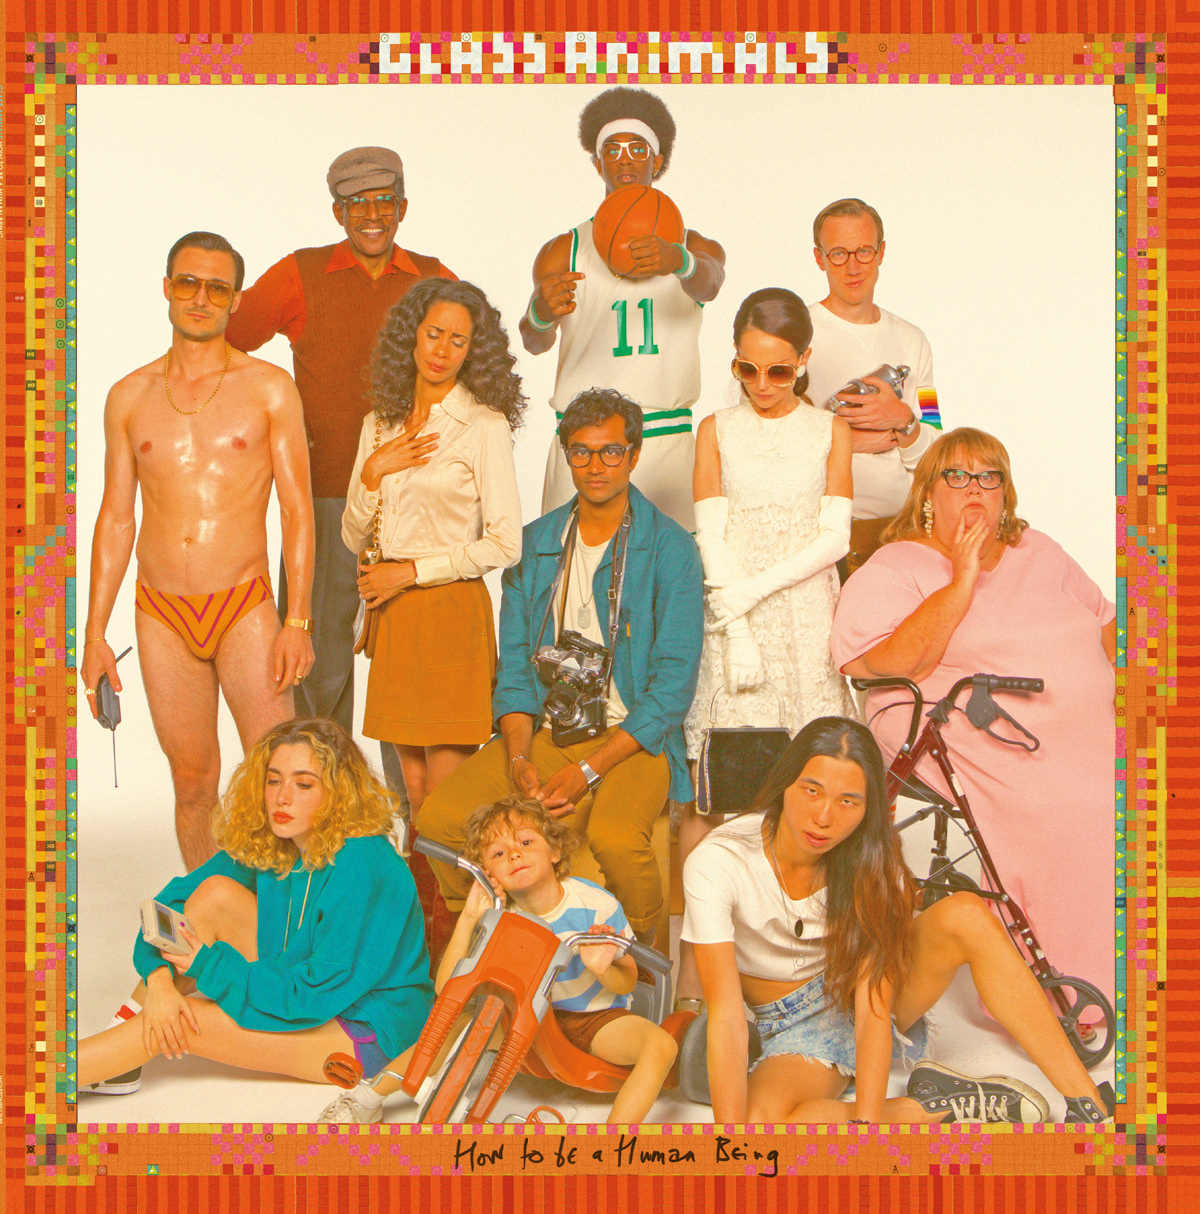 album cover styling  Creative Direction  Glass Animals music characters graphic design  photo editing Studio Shoot 70s Fashion